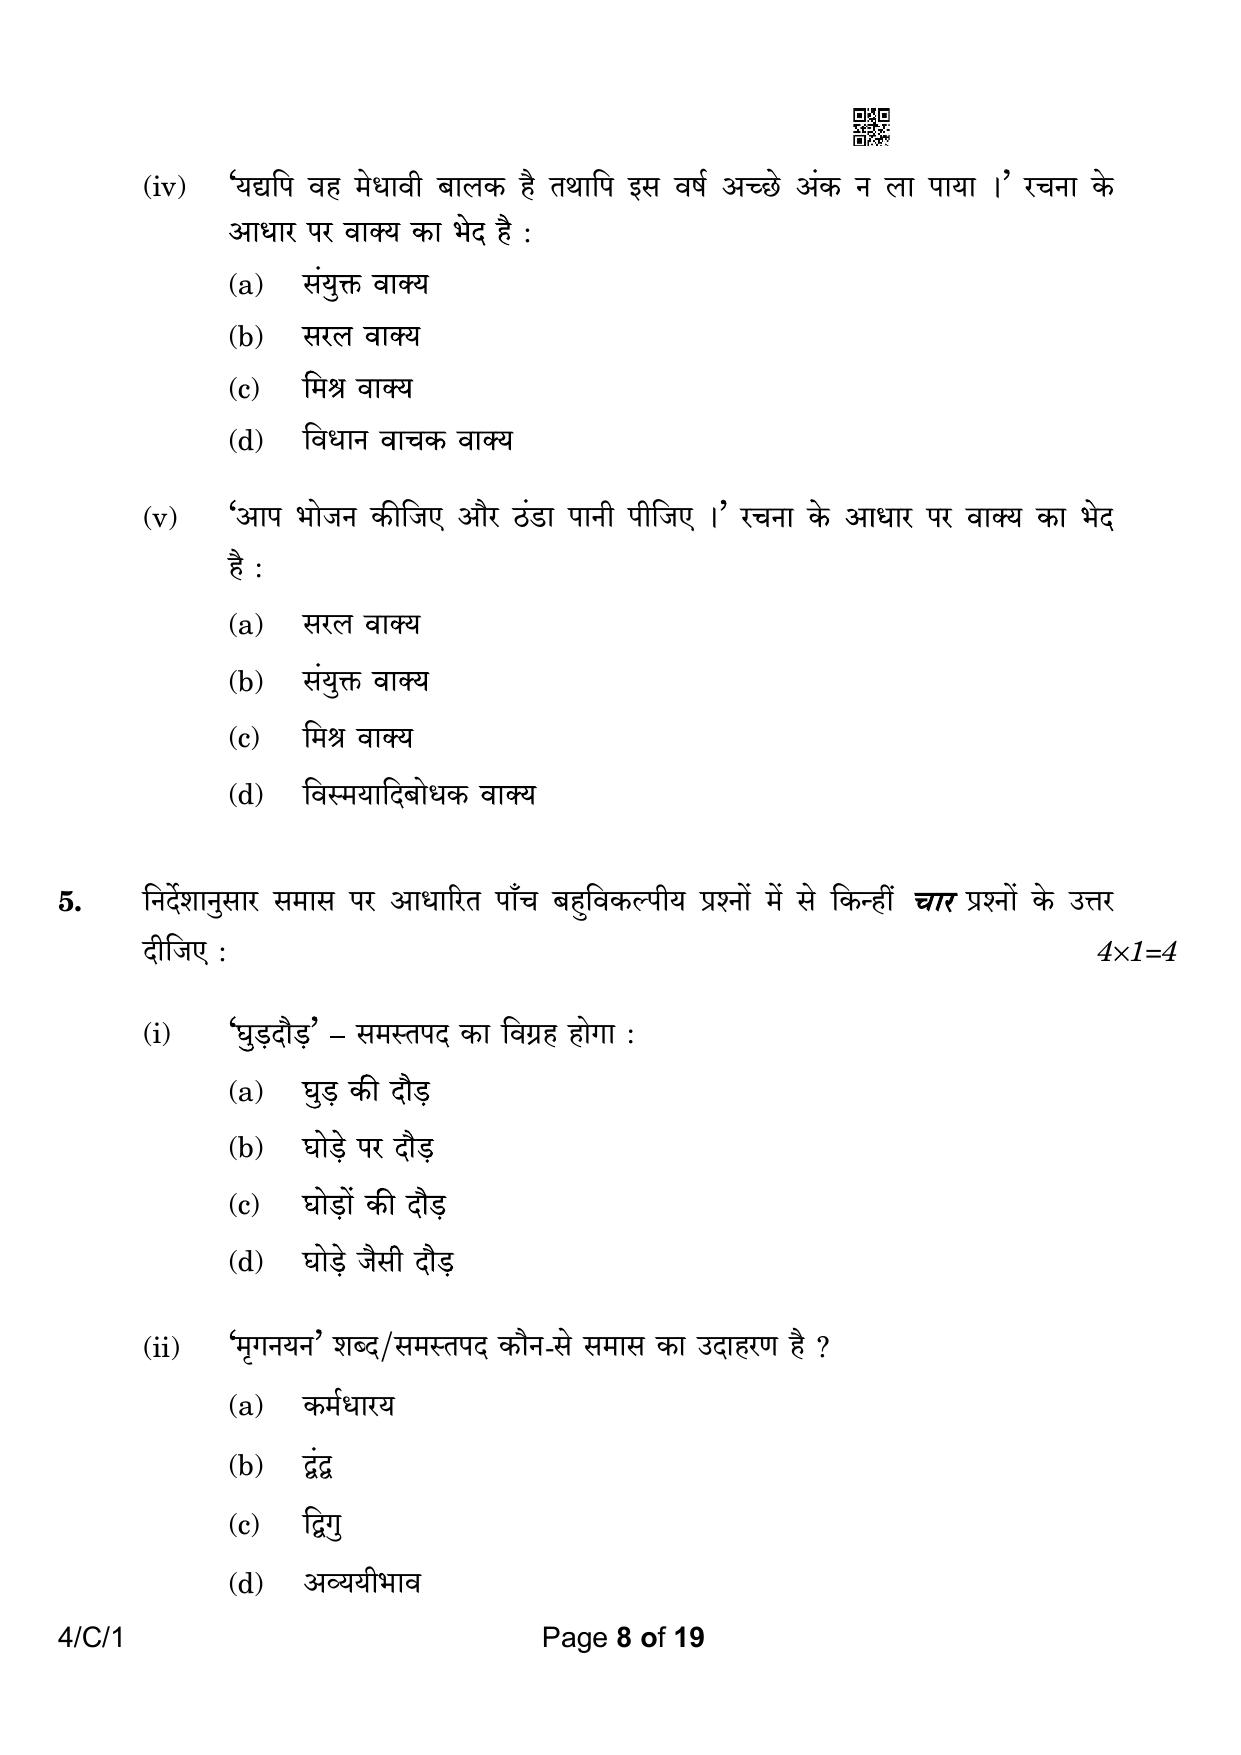 CBSE Class 10 4-1 Hindi B 2023 (Compartment) Question Paper - Page 8